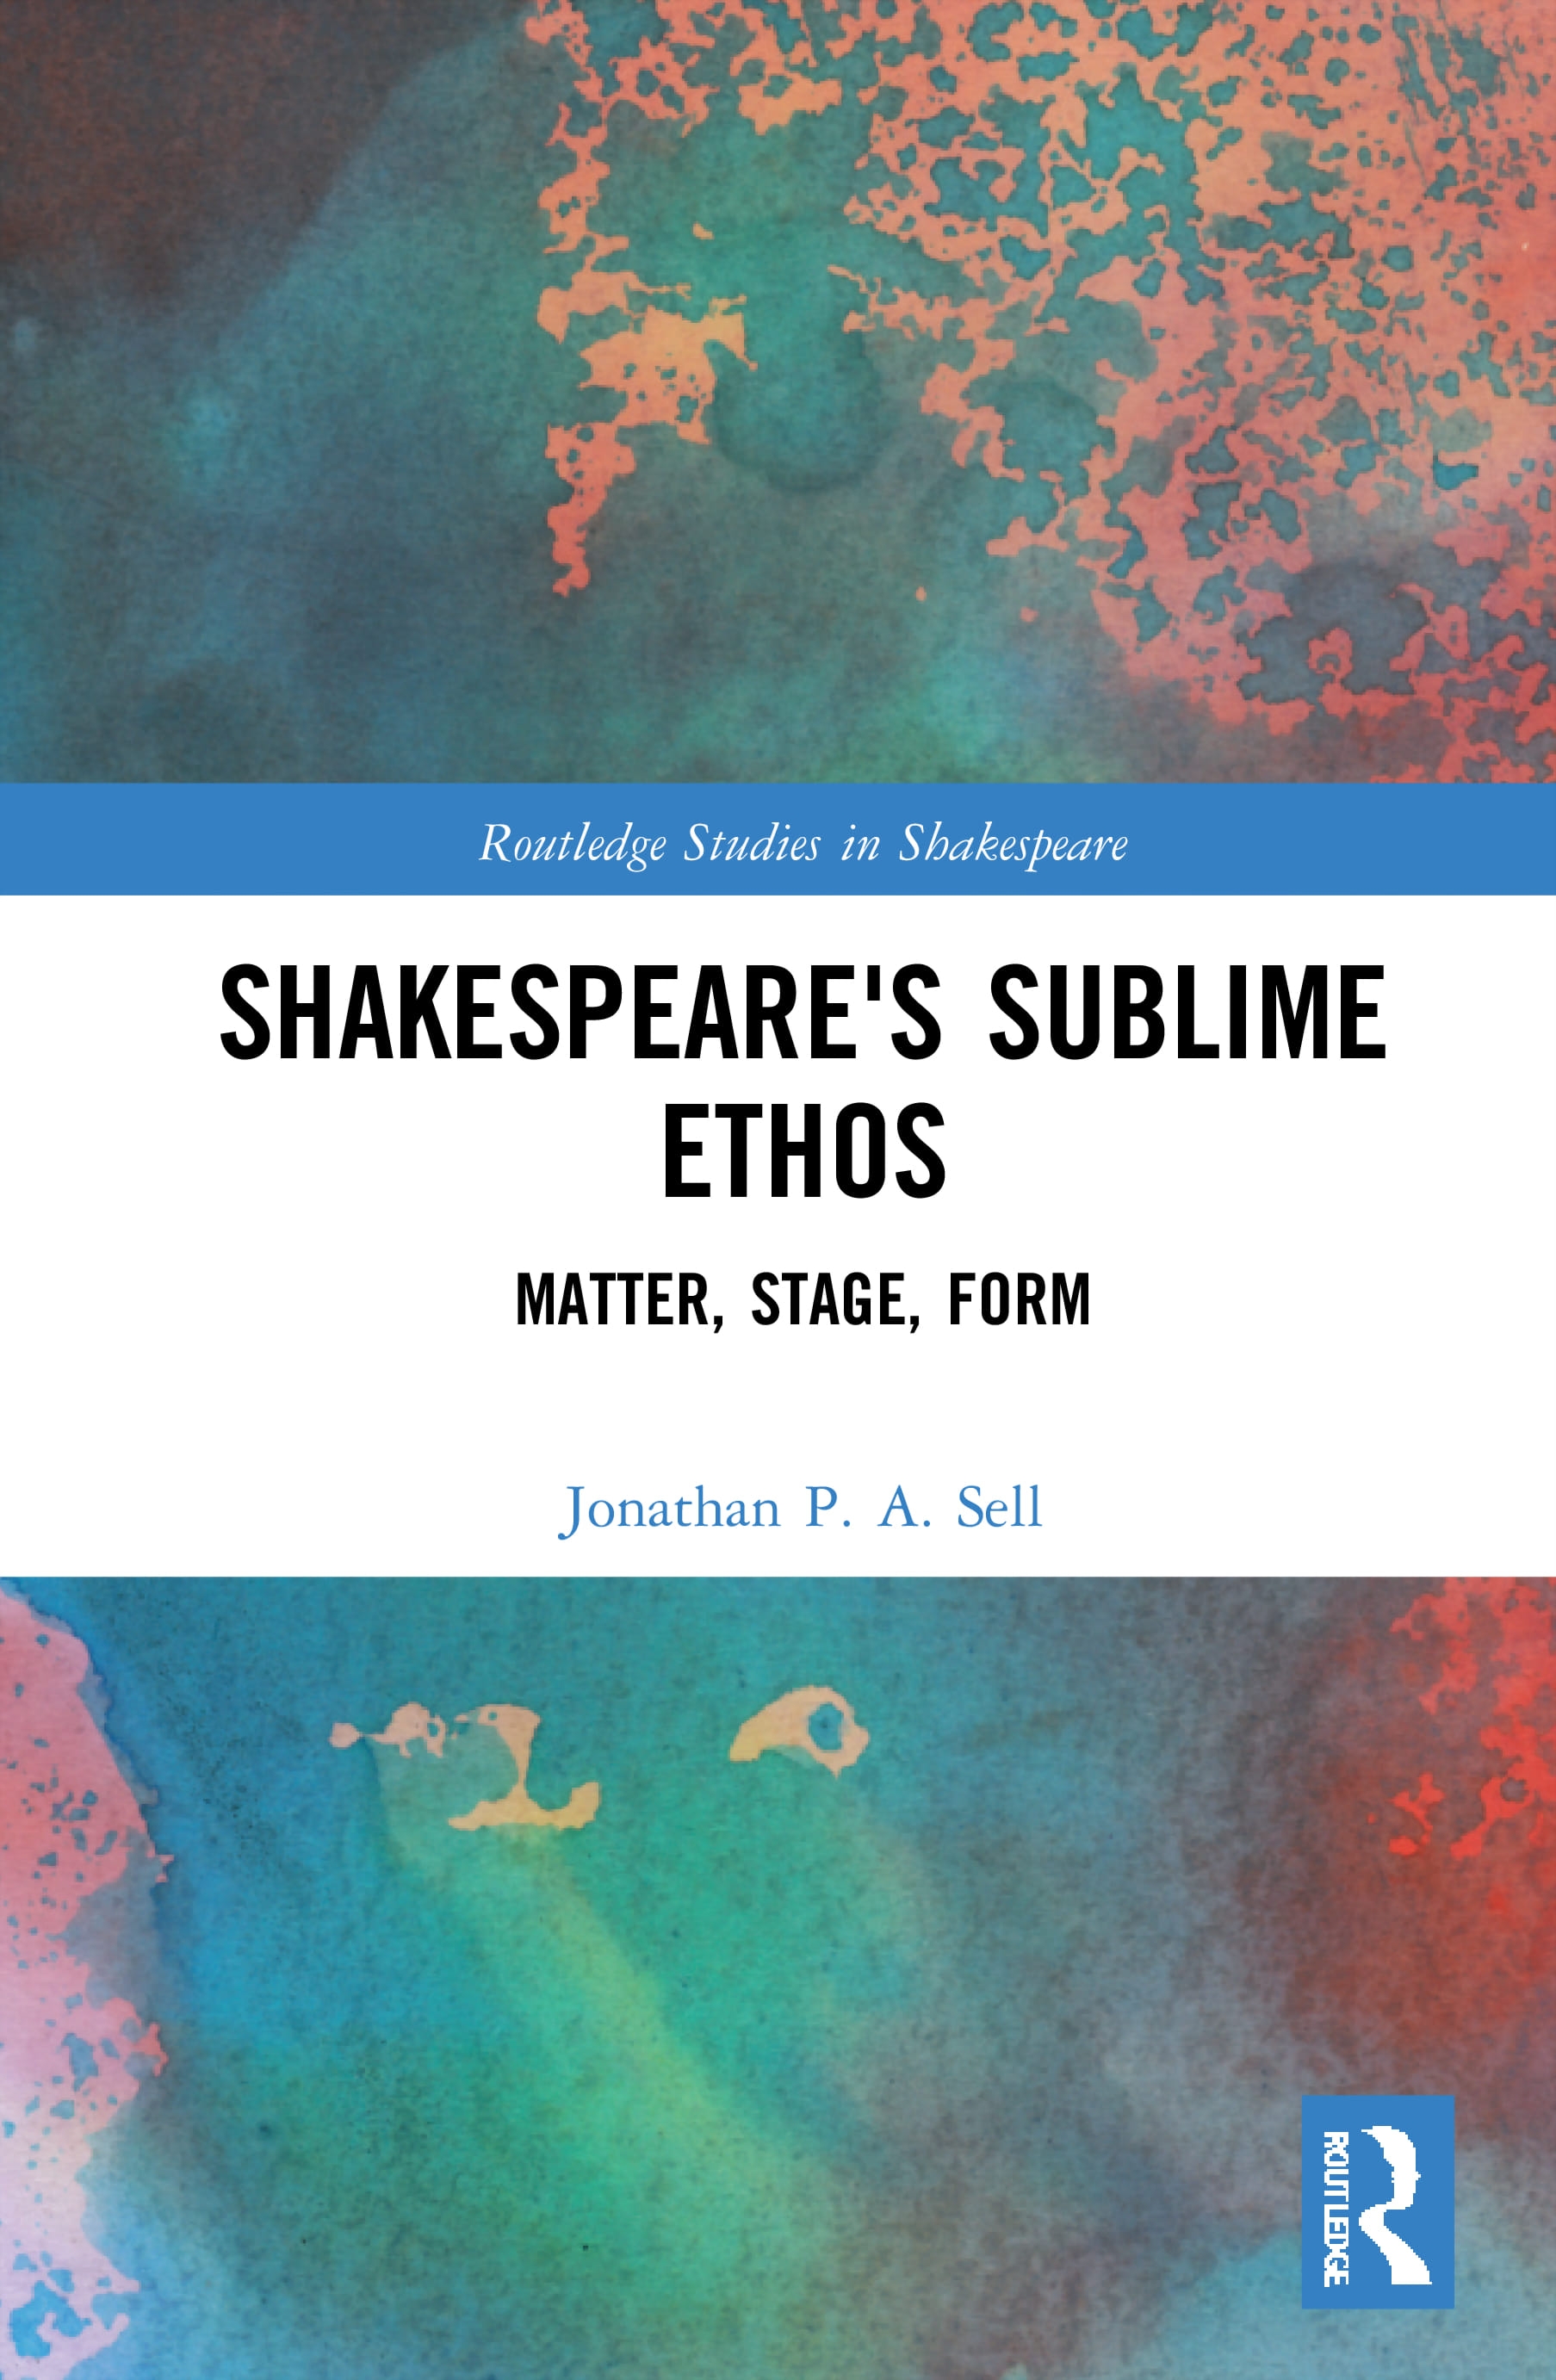 Shakespeare’s Sublime Ethos: Matter, Stage, Form